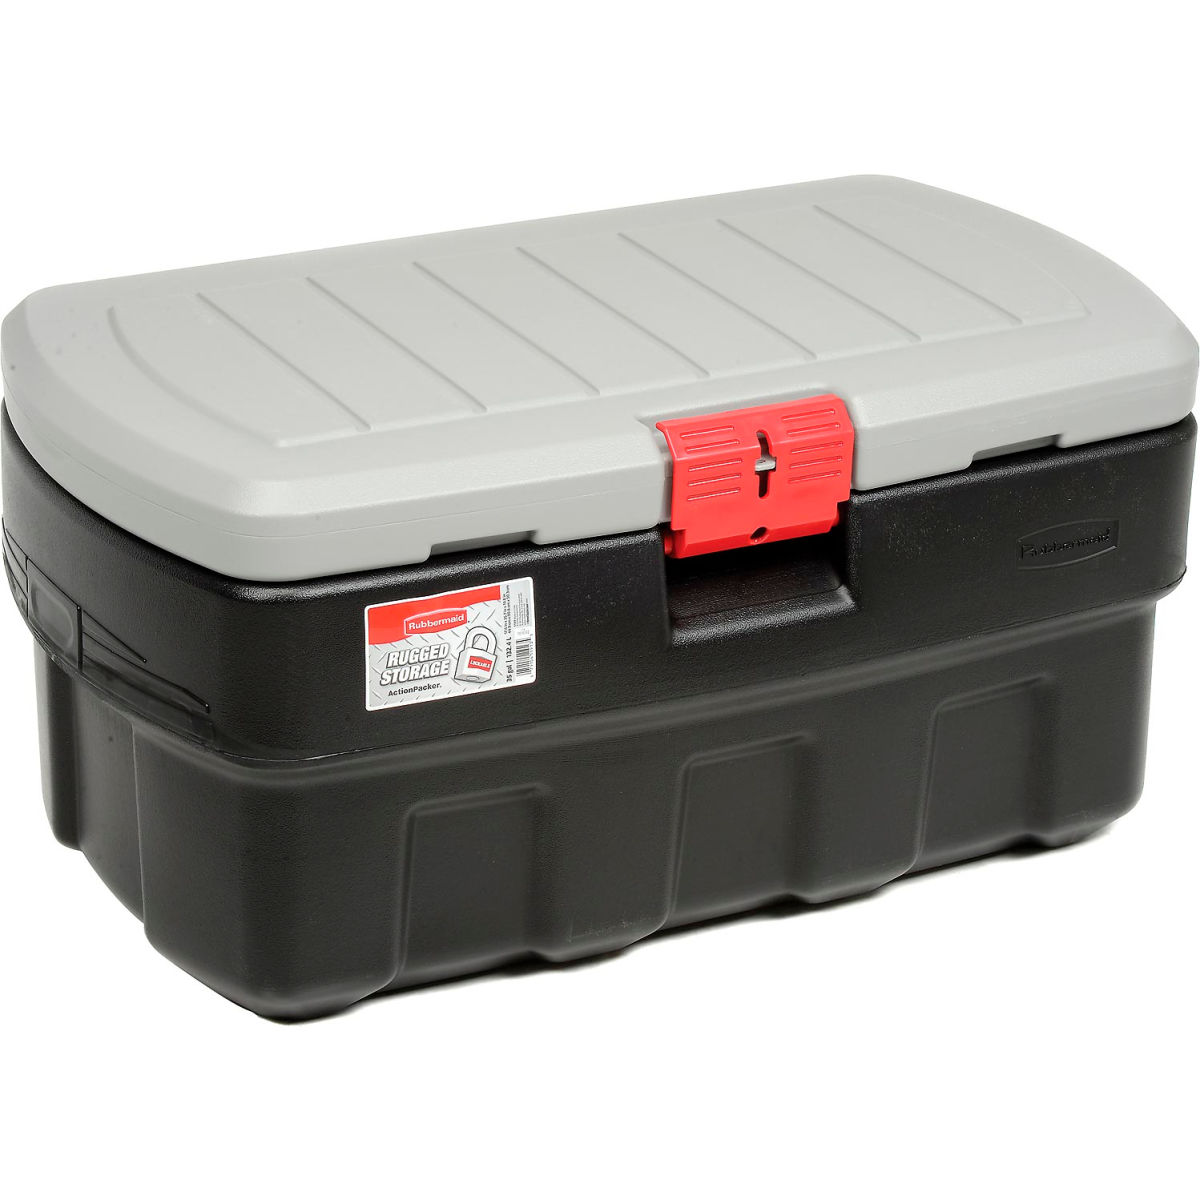 United Solutions 4134400 35 gal ActionPacker Lockable Storage Box - Black - 32.25 x 20 x 17.25 in.